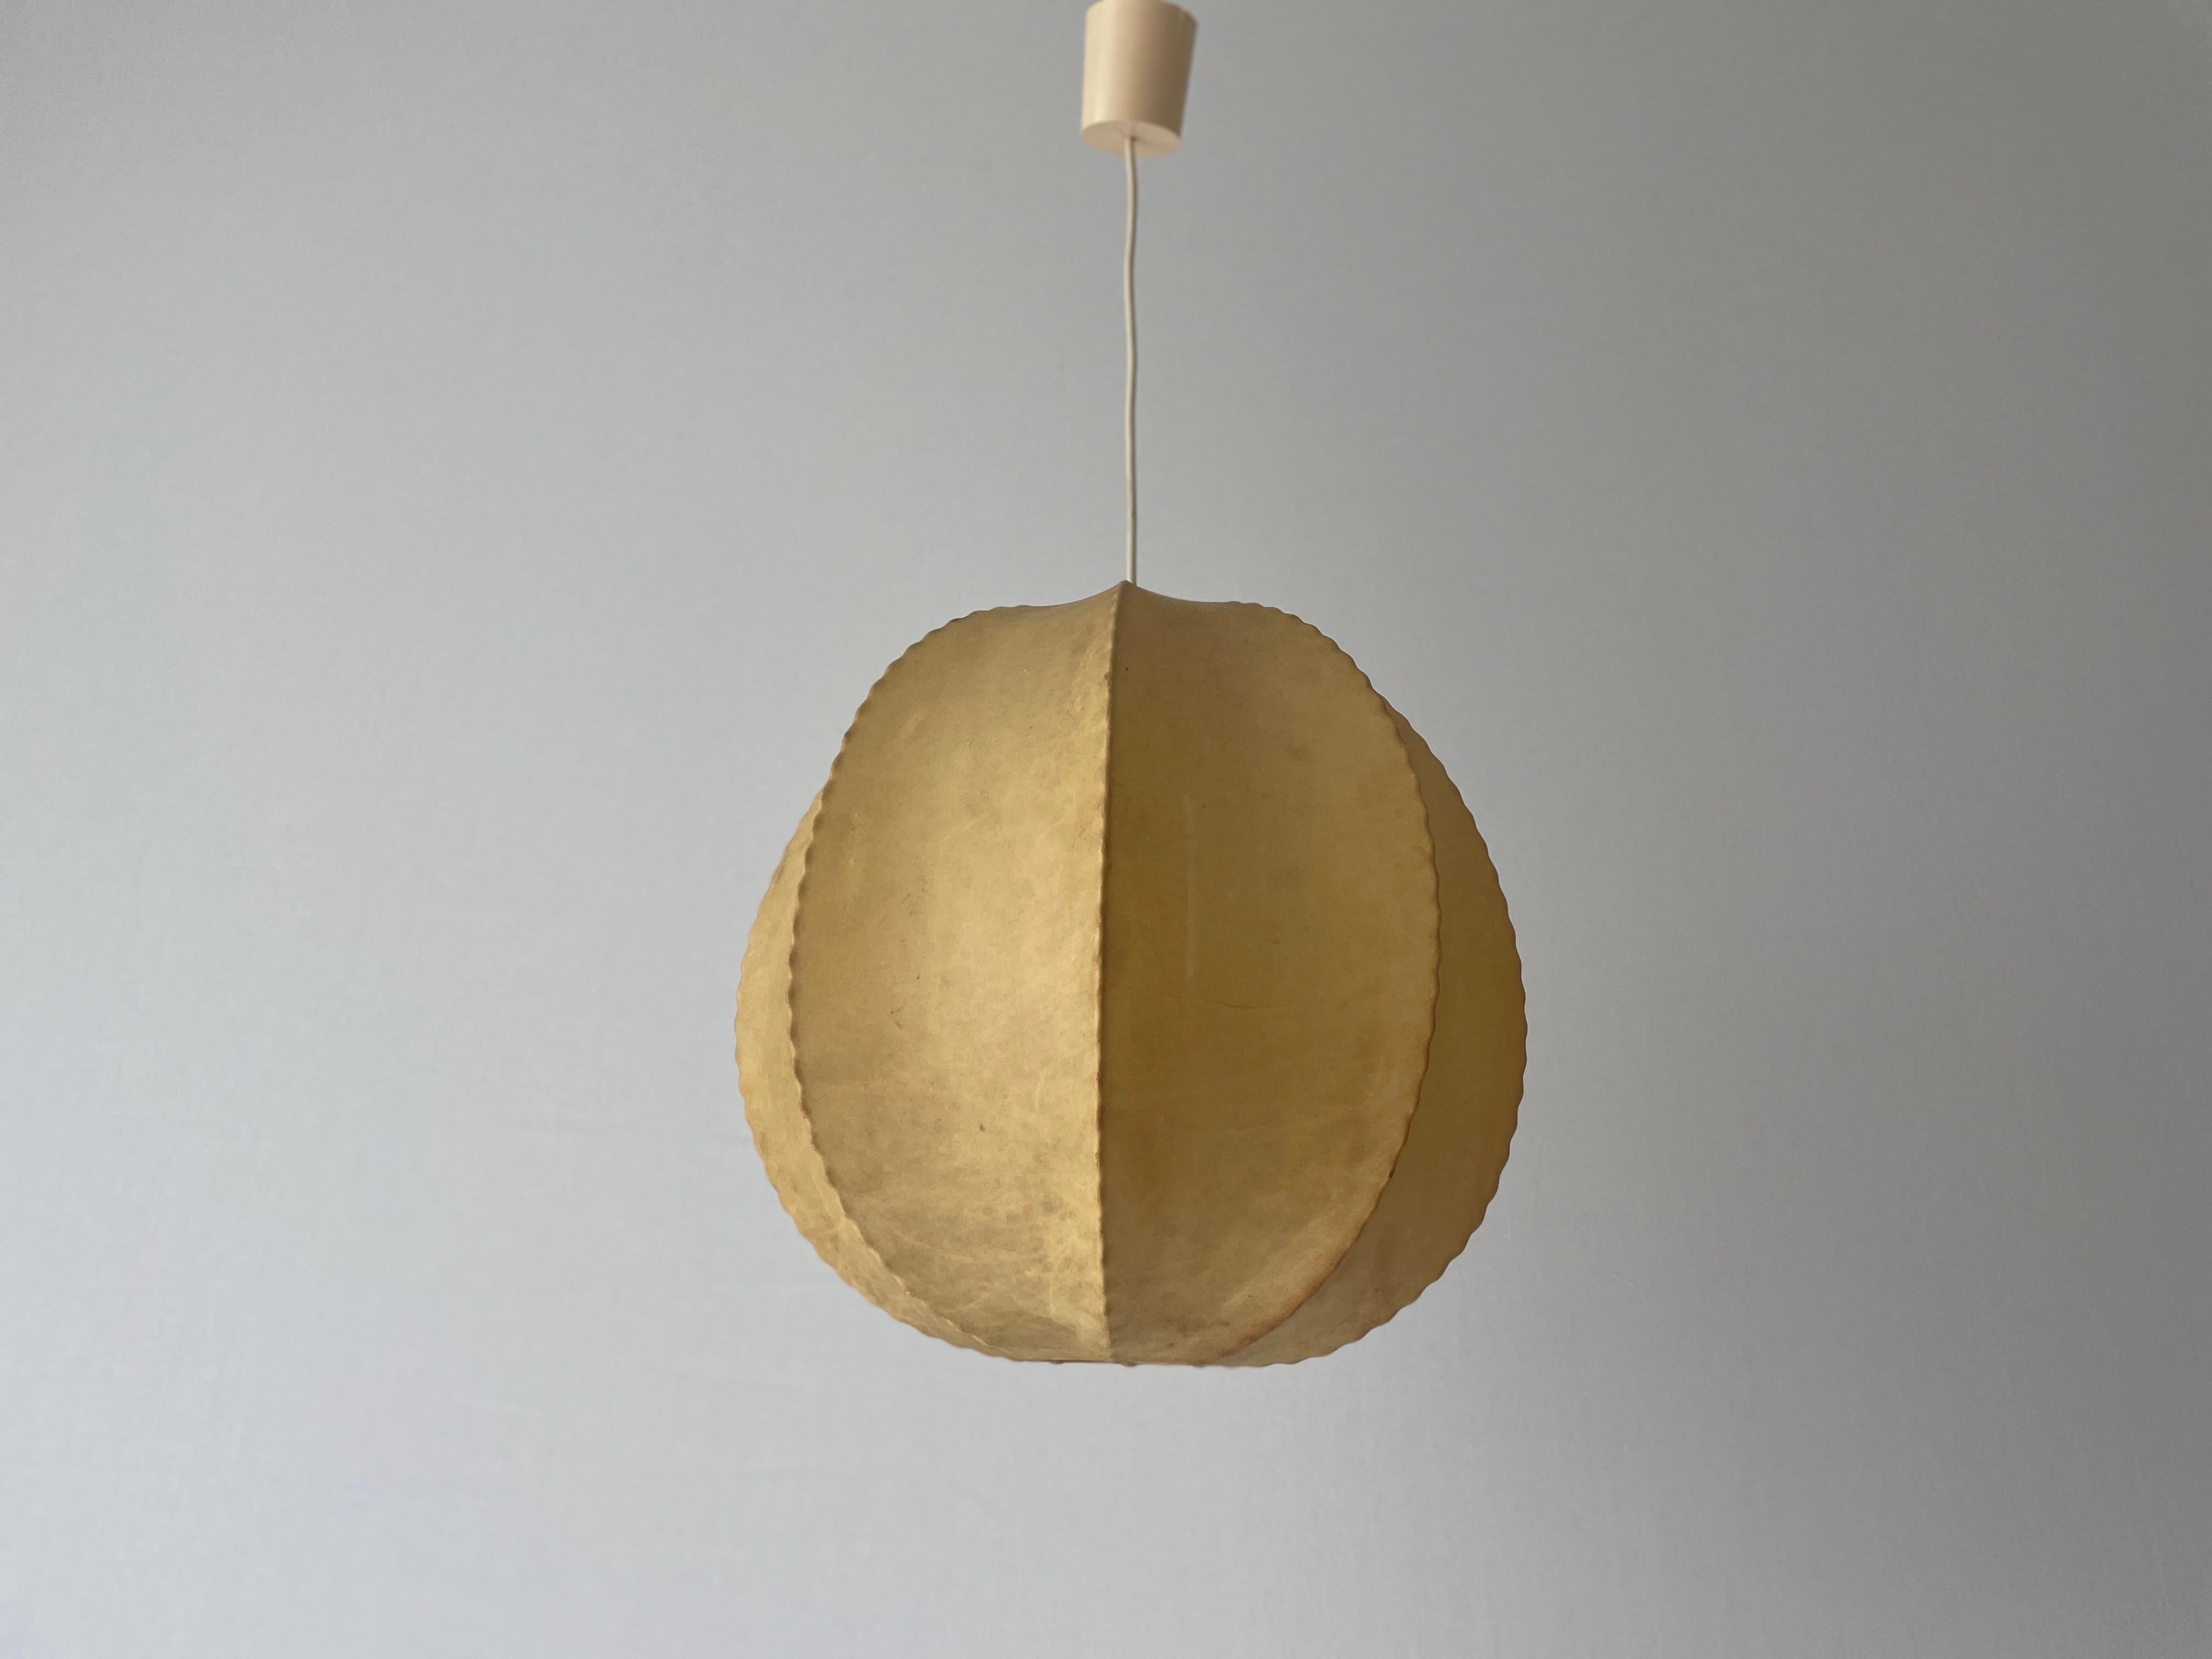 Cocoon Ball Design Pendant Lamp, 1960s, Italy In Excellent Condition For Sale In Hagenbach, DE